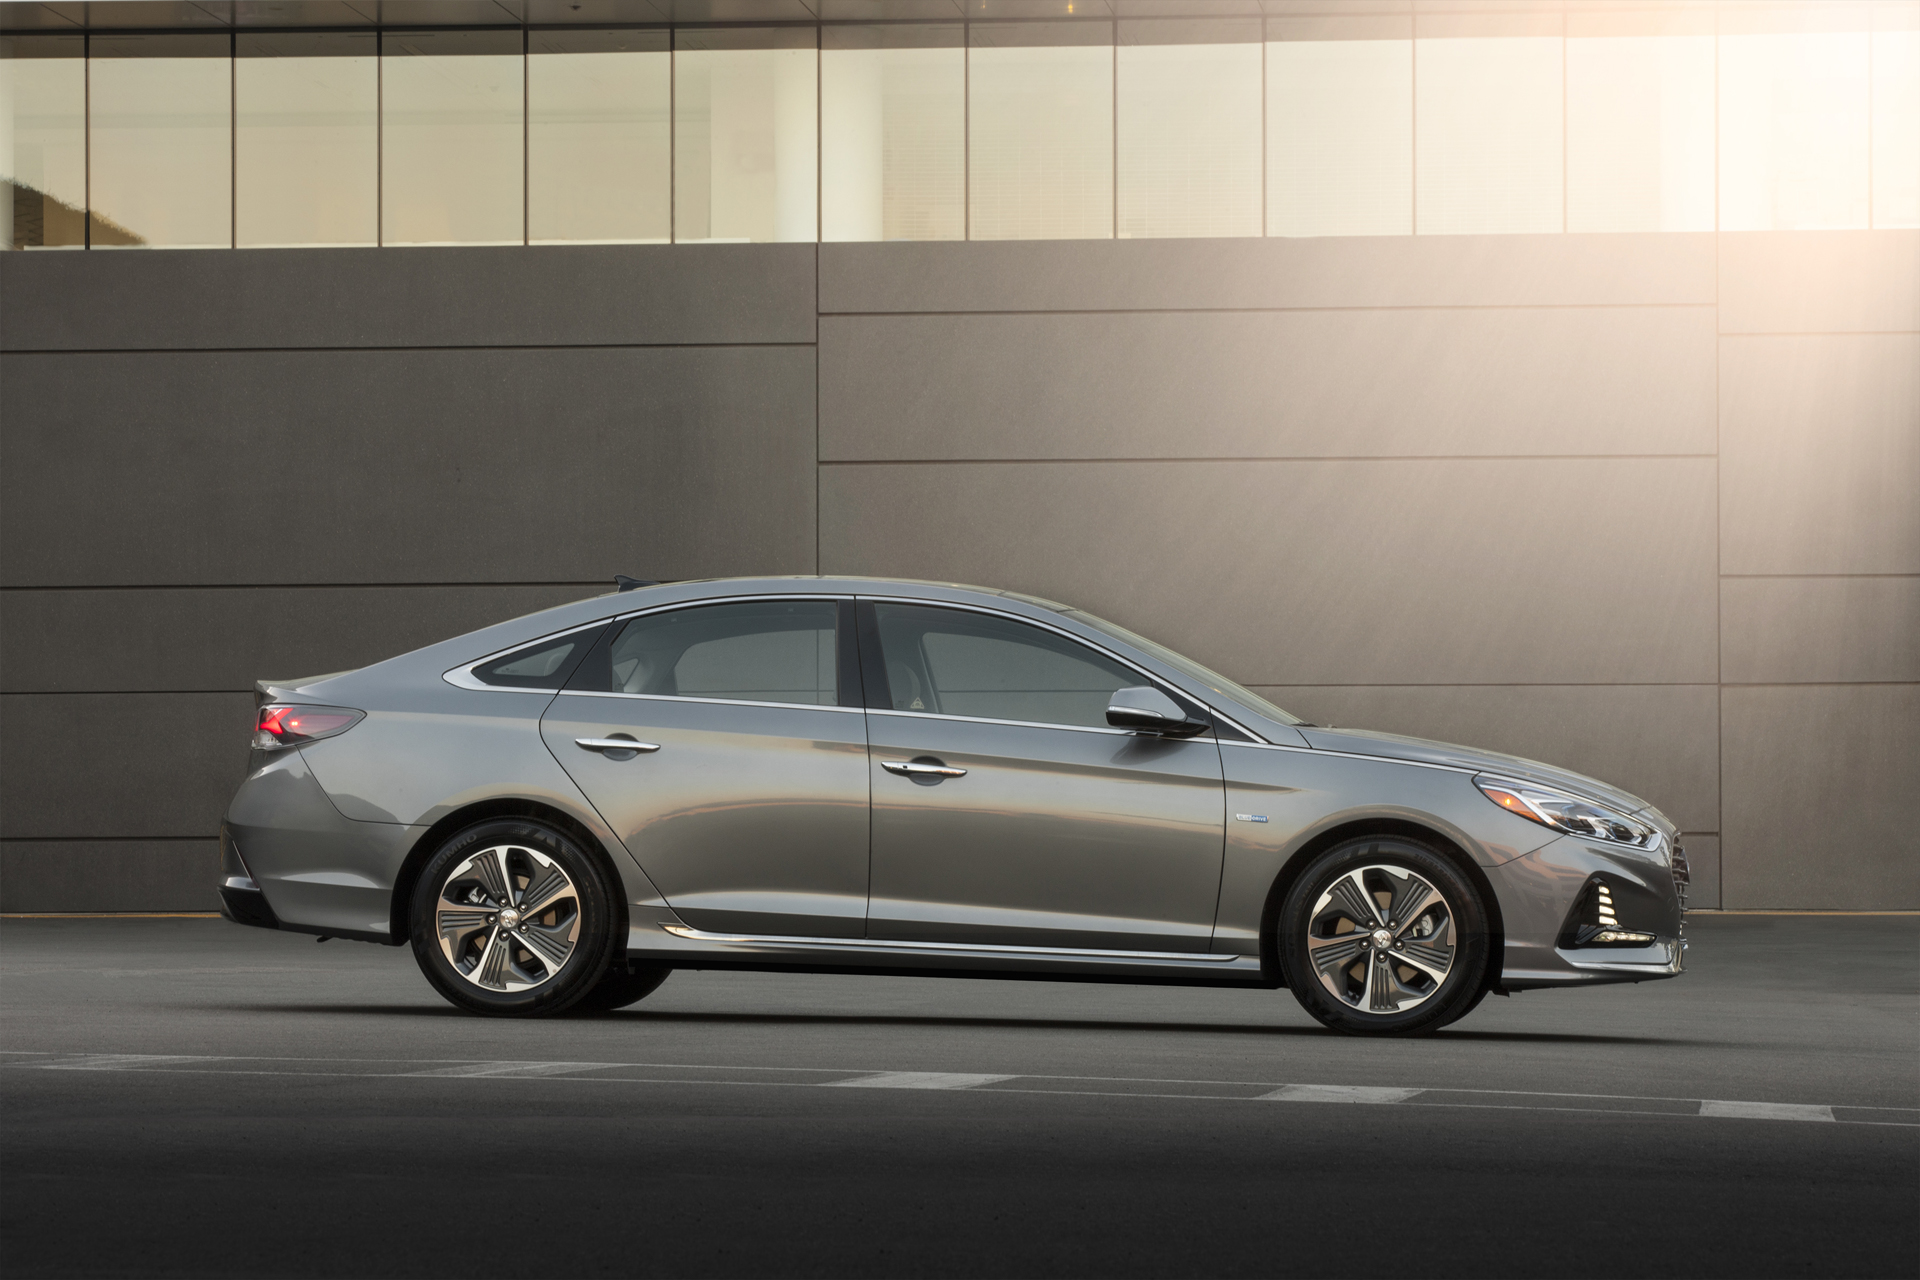 2018 Hyundai Sonata Review Ratings Specs Prices And Photos - The Car Connection